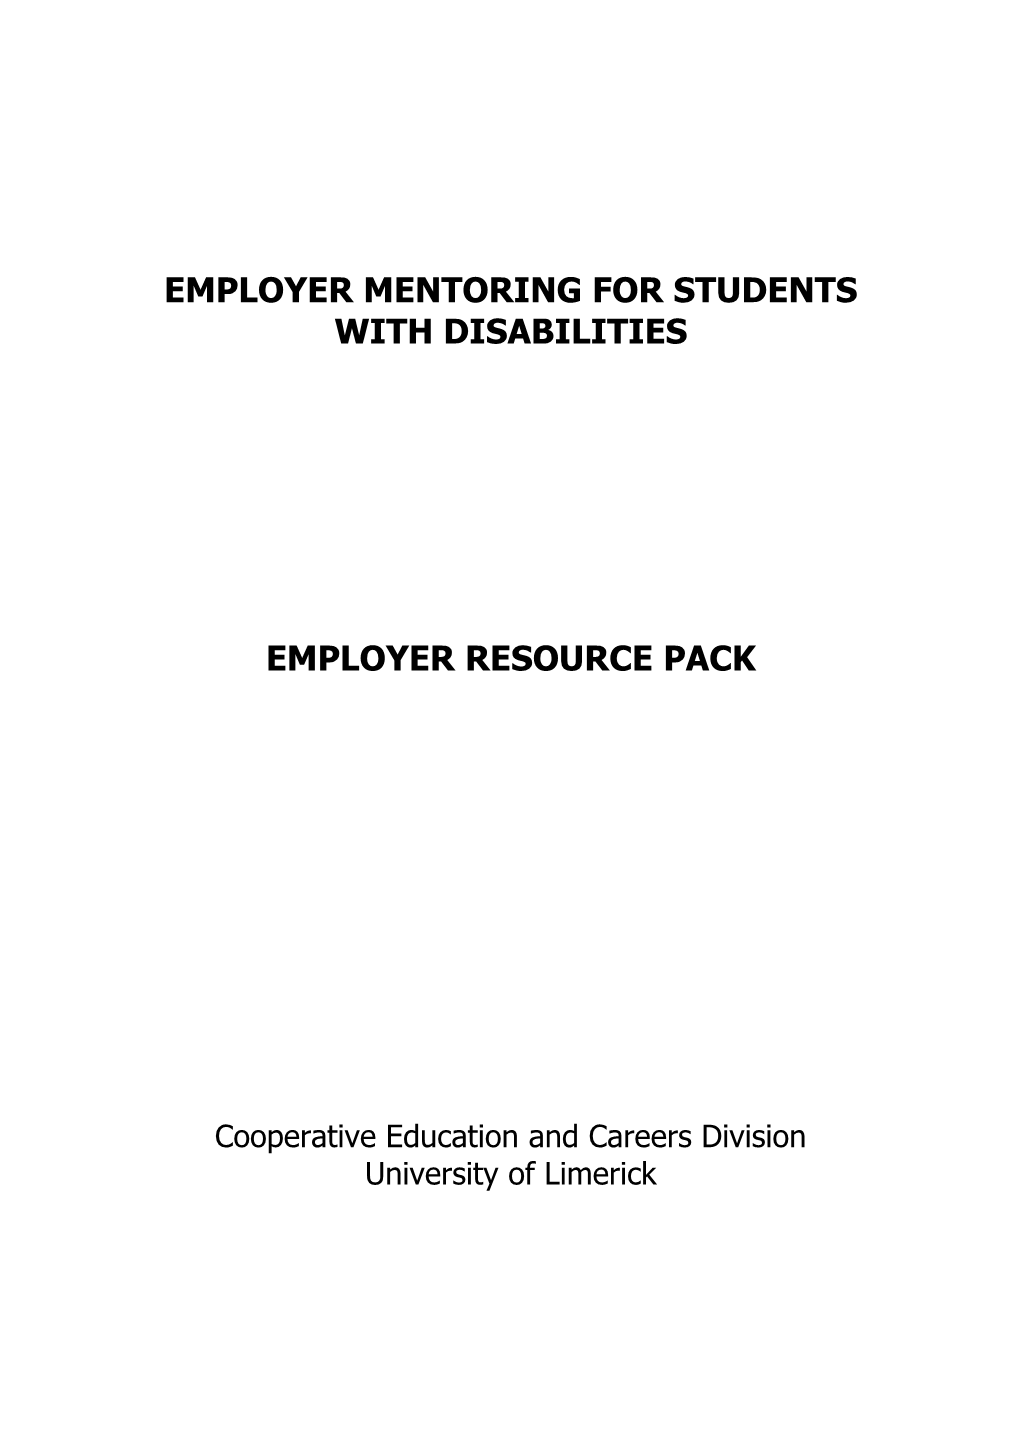 Employer Mentoring for Students with Disabilities